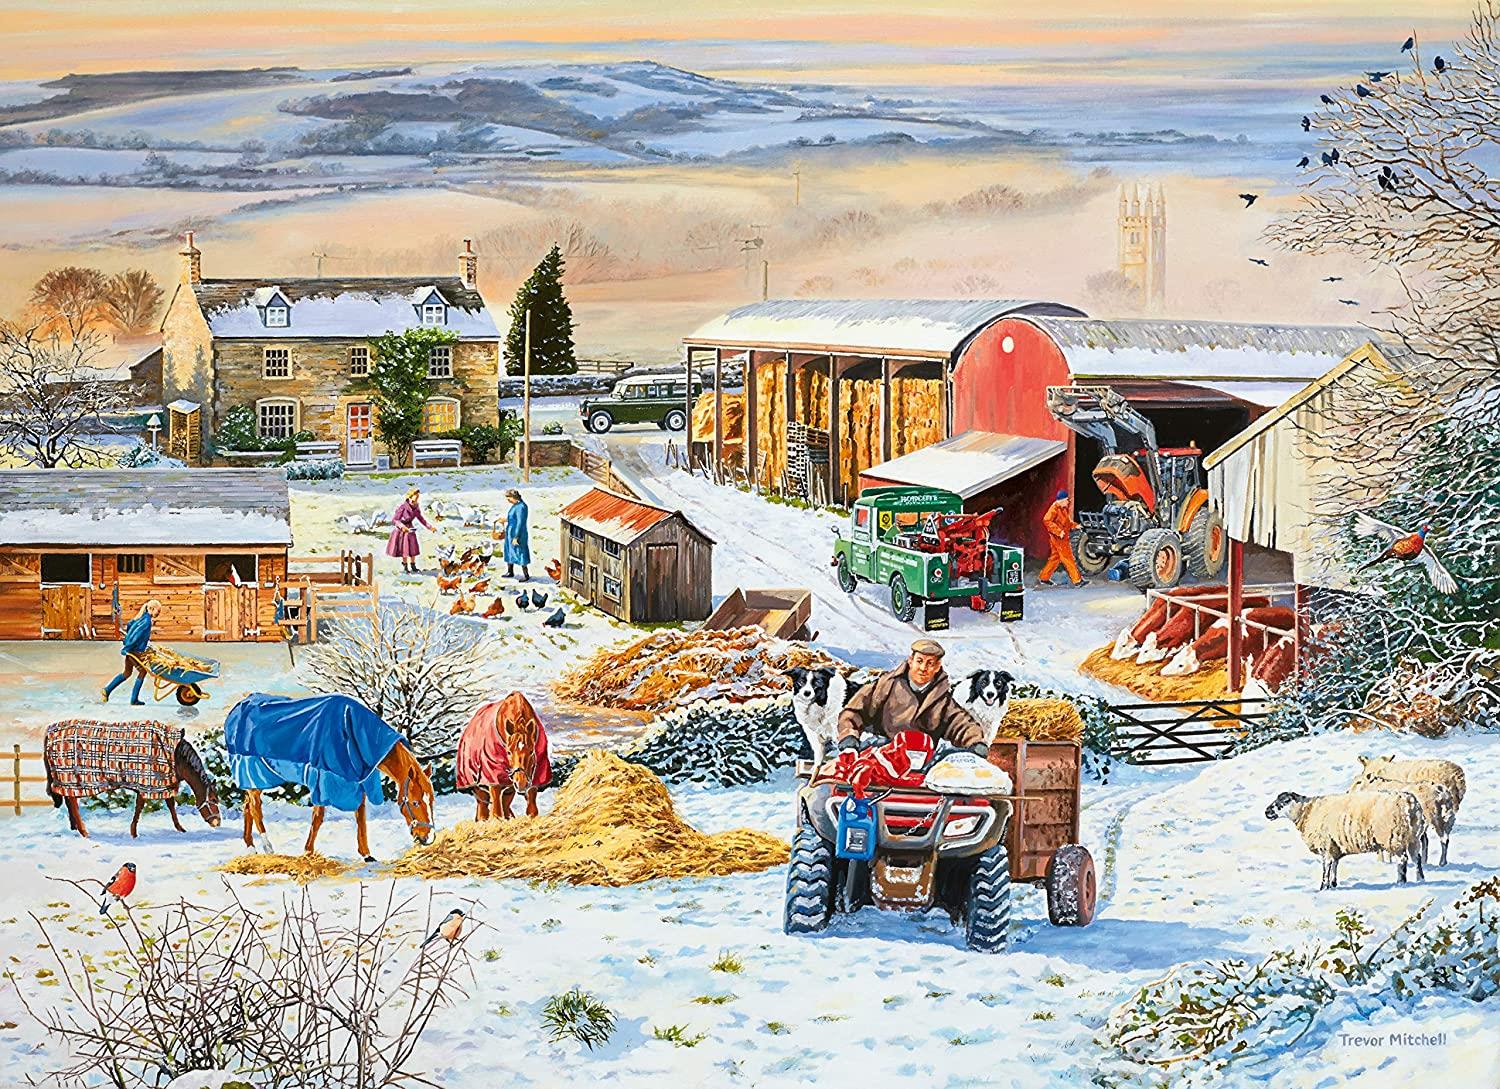 Ravensburger Winter on the Farm Jigsaw Puzzle (1000 Pieces)